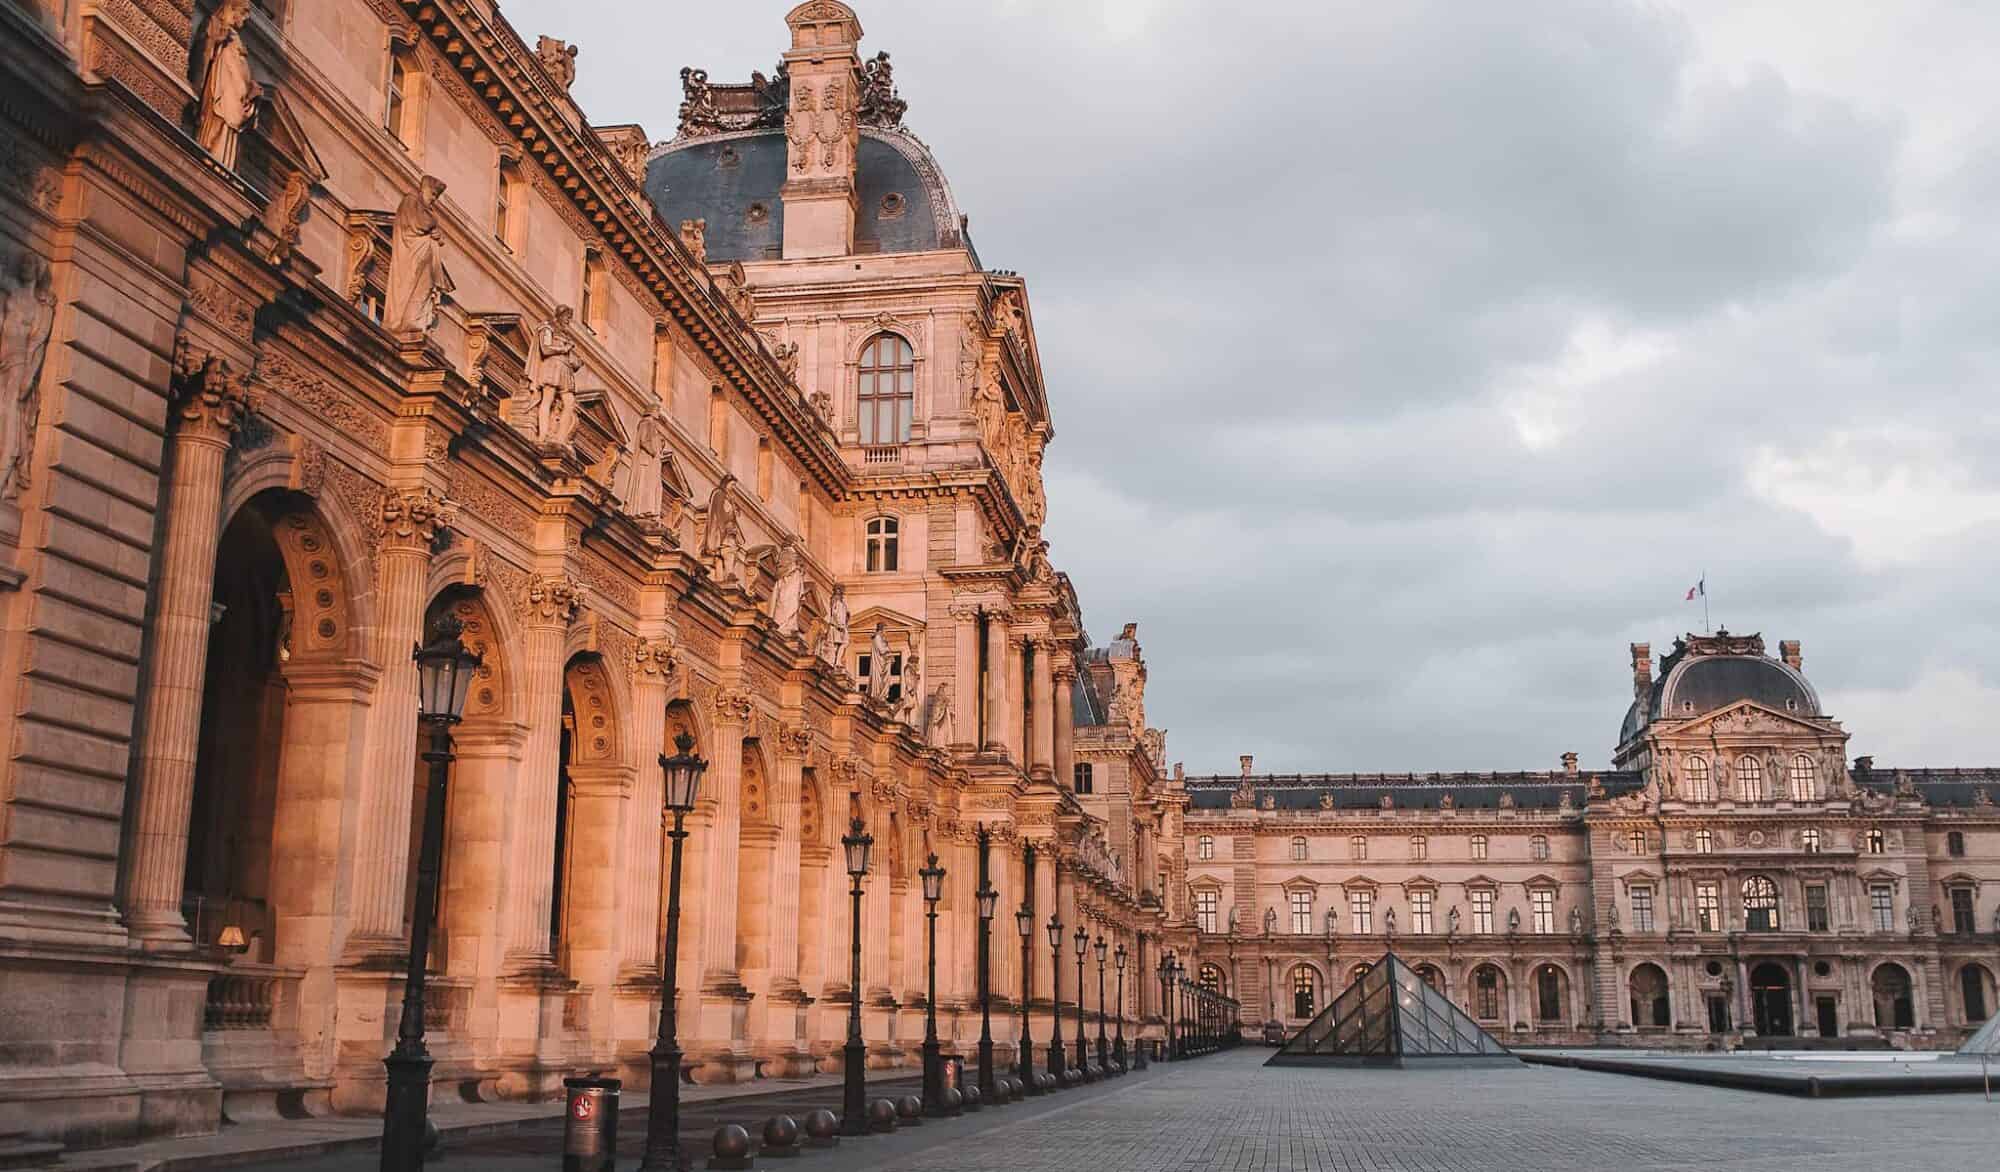 The courtyard of the Louvre Museum at the golden hour, with the iconic glass Pyramid straight ahead.